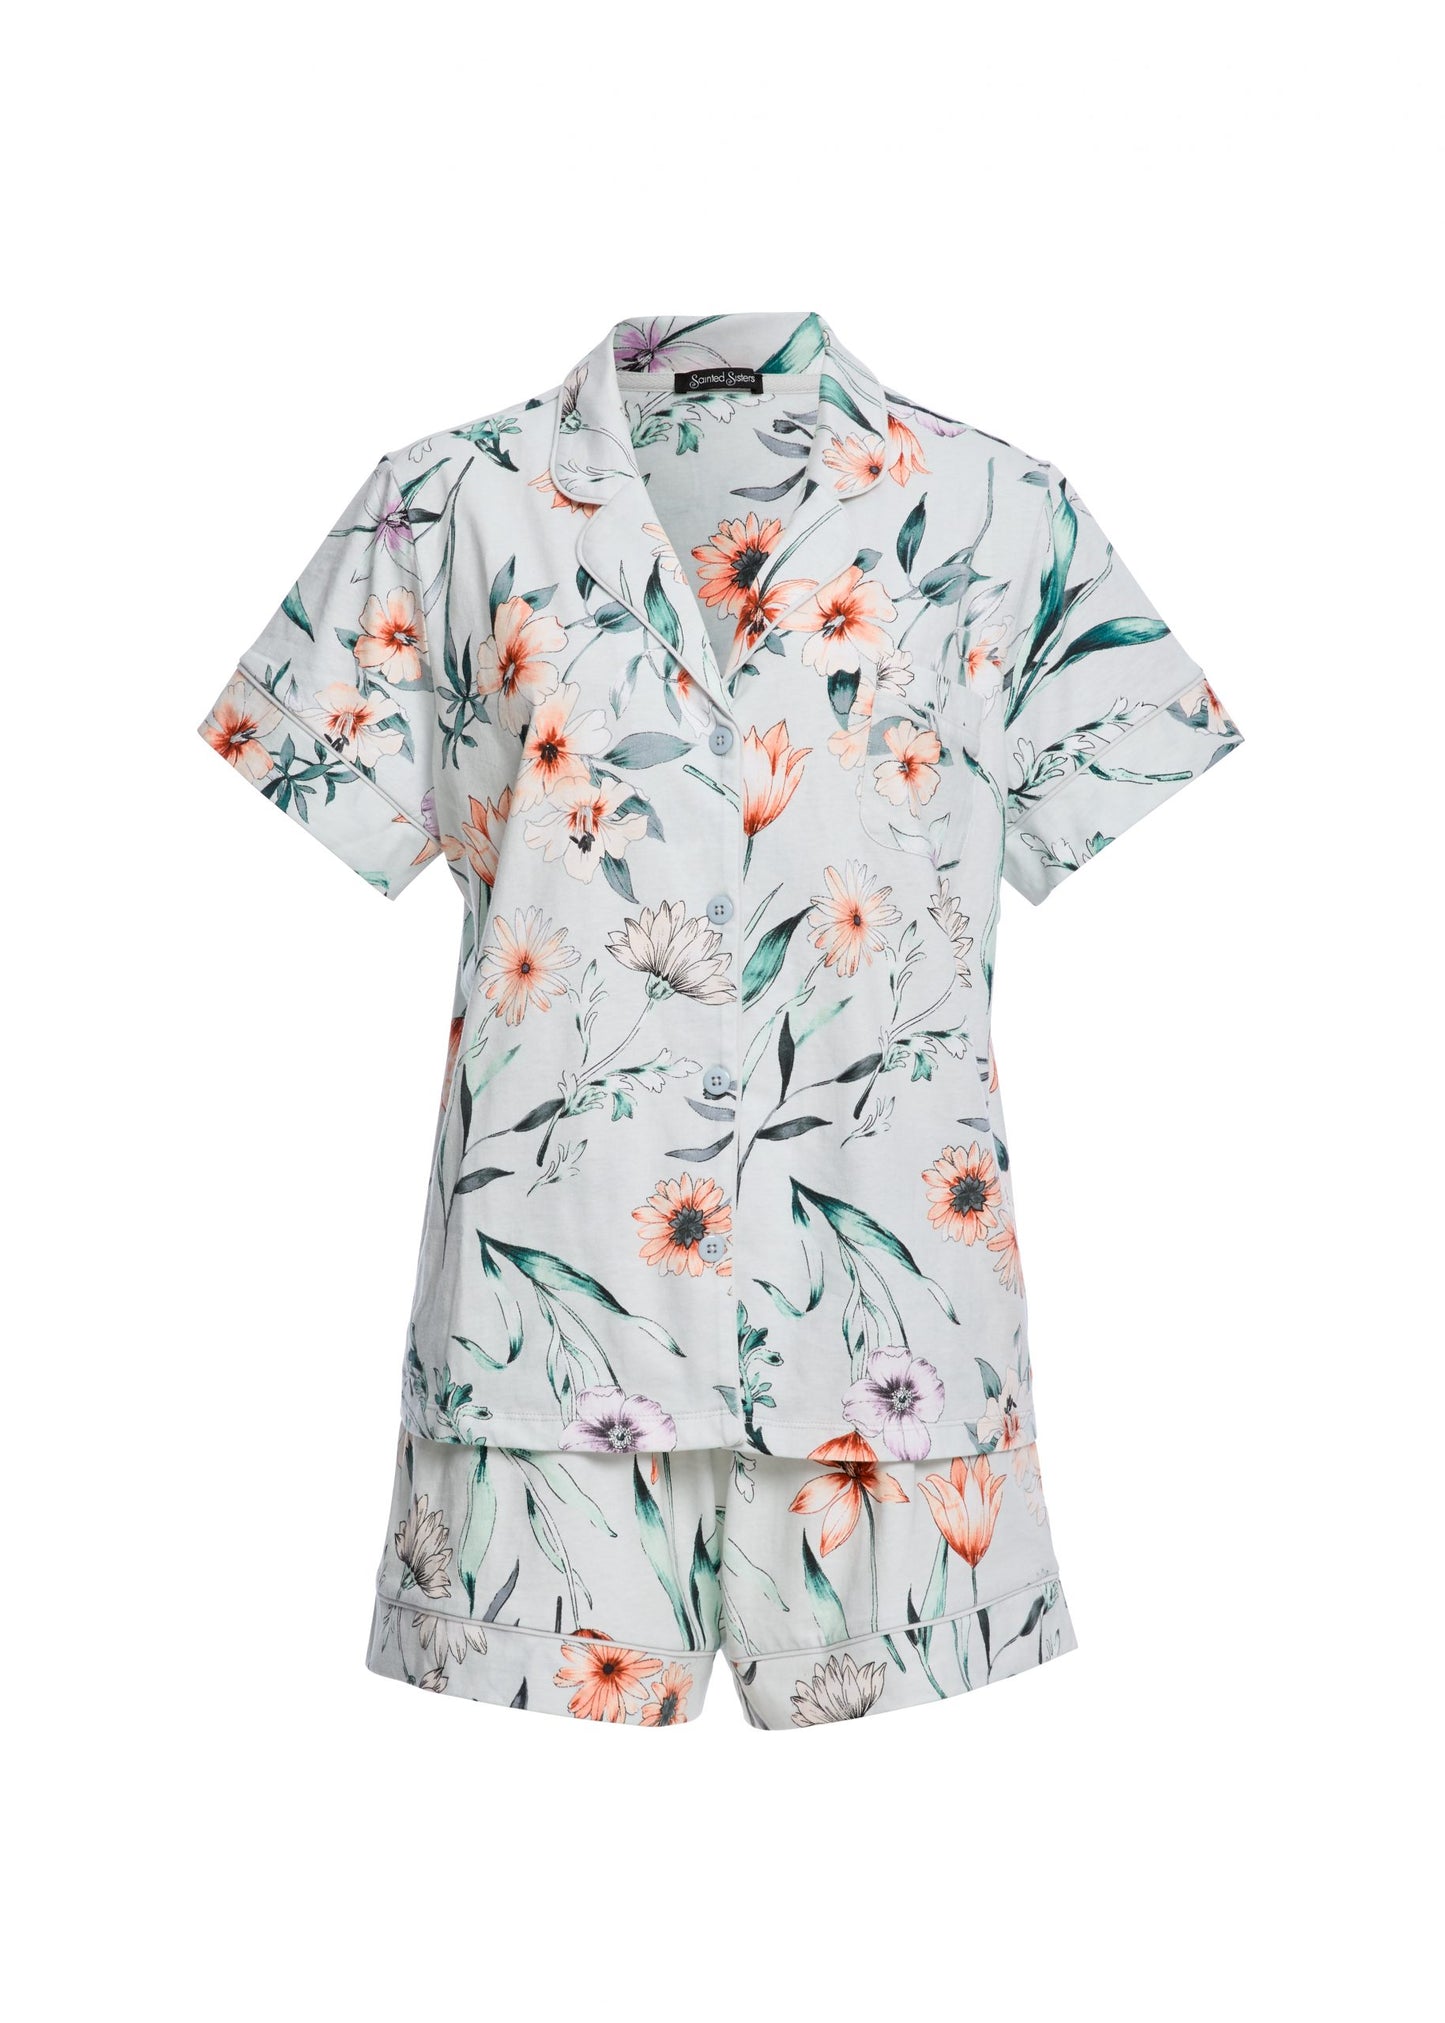 SAINTED SISTERS PRINTED JERSEY S/S PJS WATERCOLOUR FLORAL